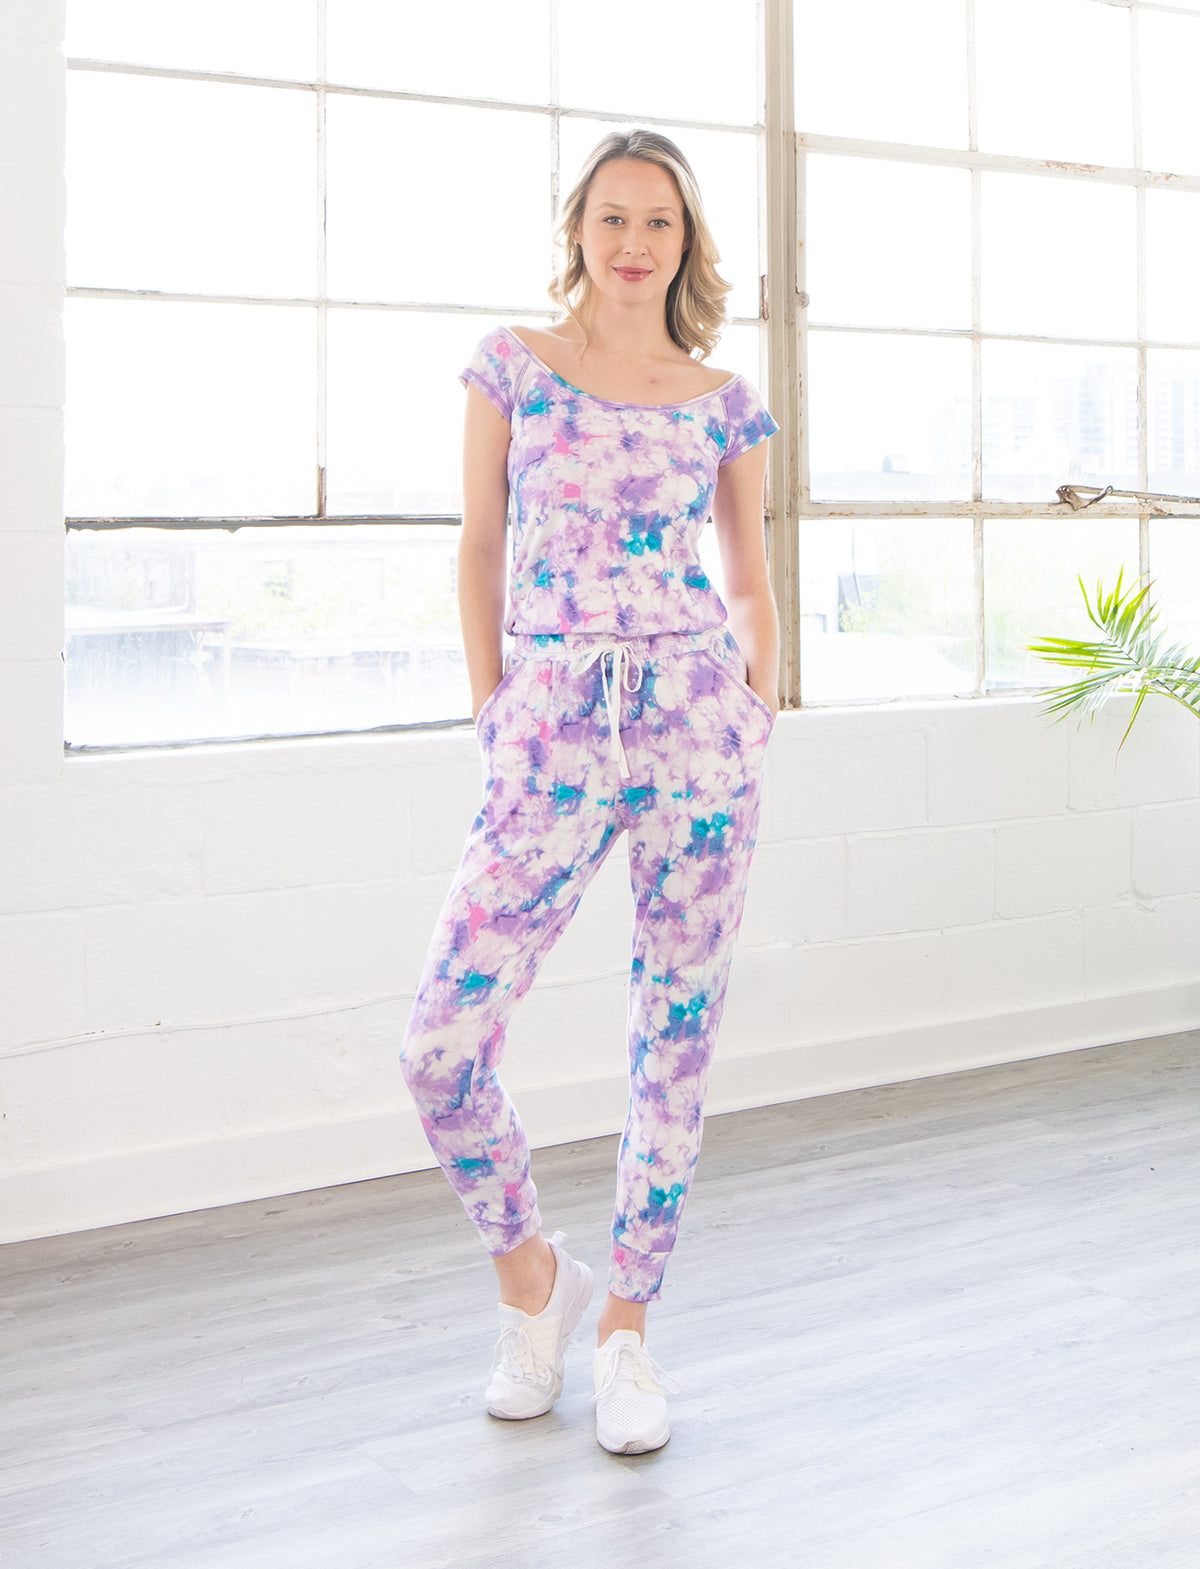 The Best Source for Deals The Best Deals: for LADIES EVERYDAY ROMPER Jill  Yoga